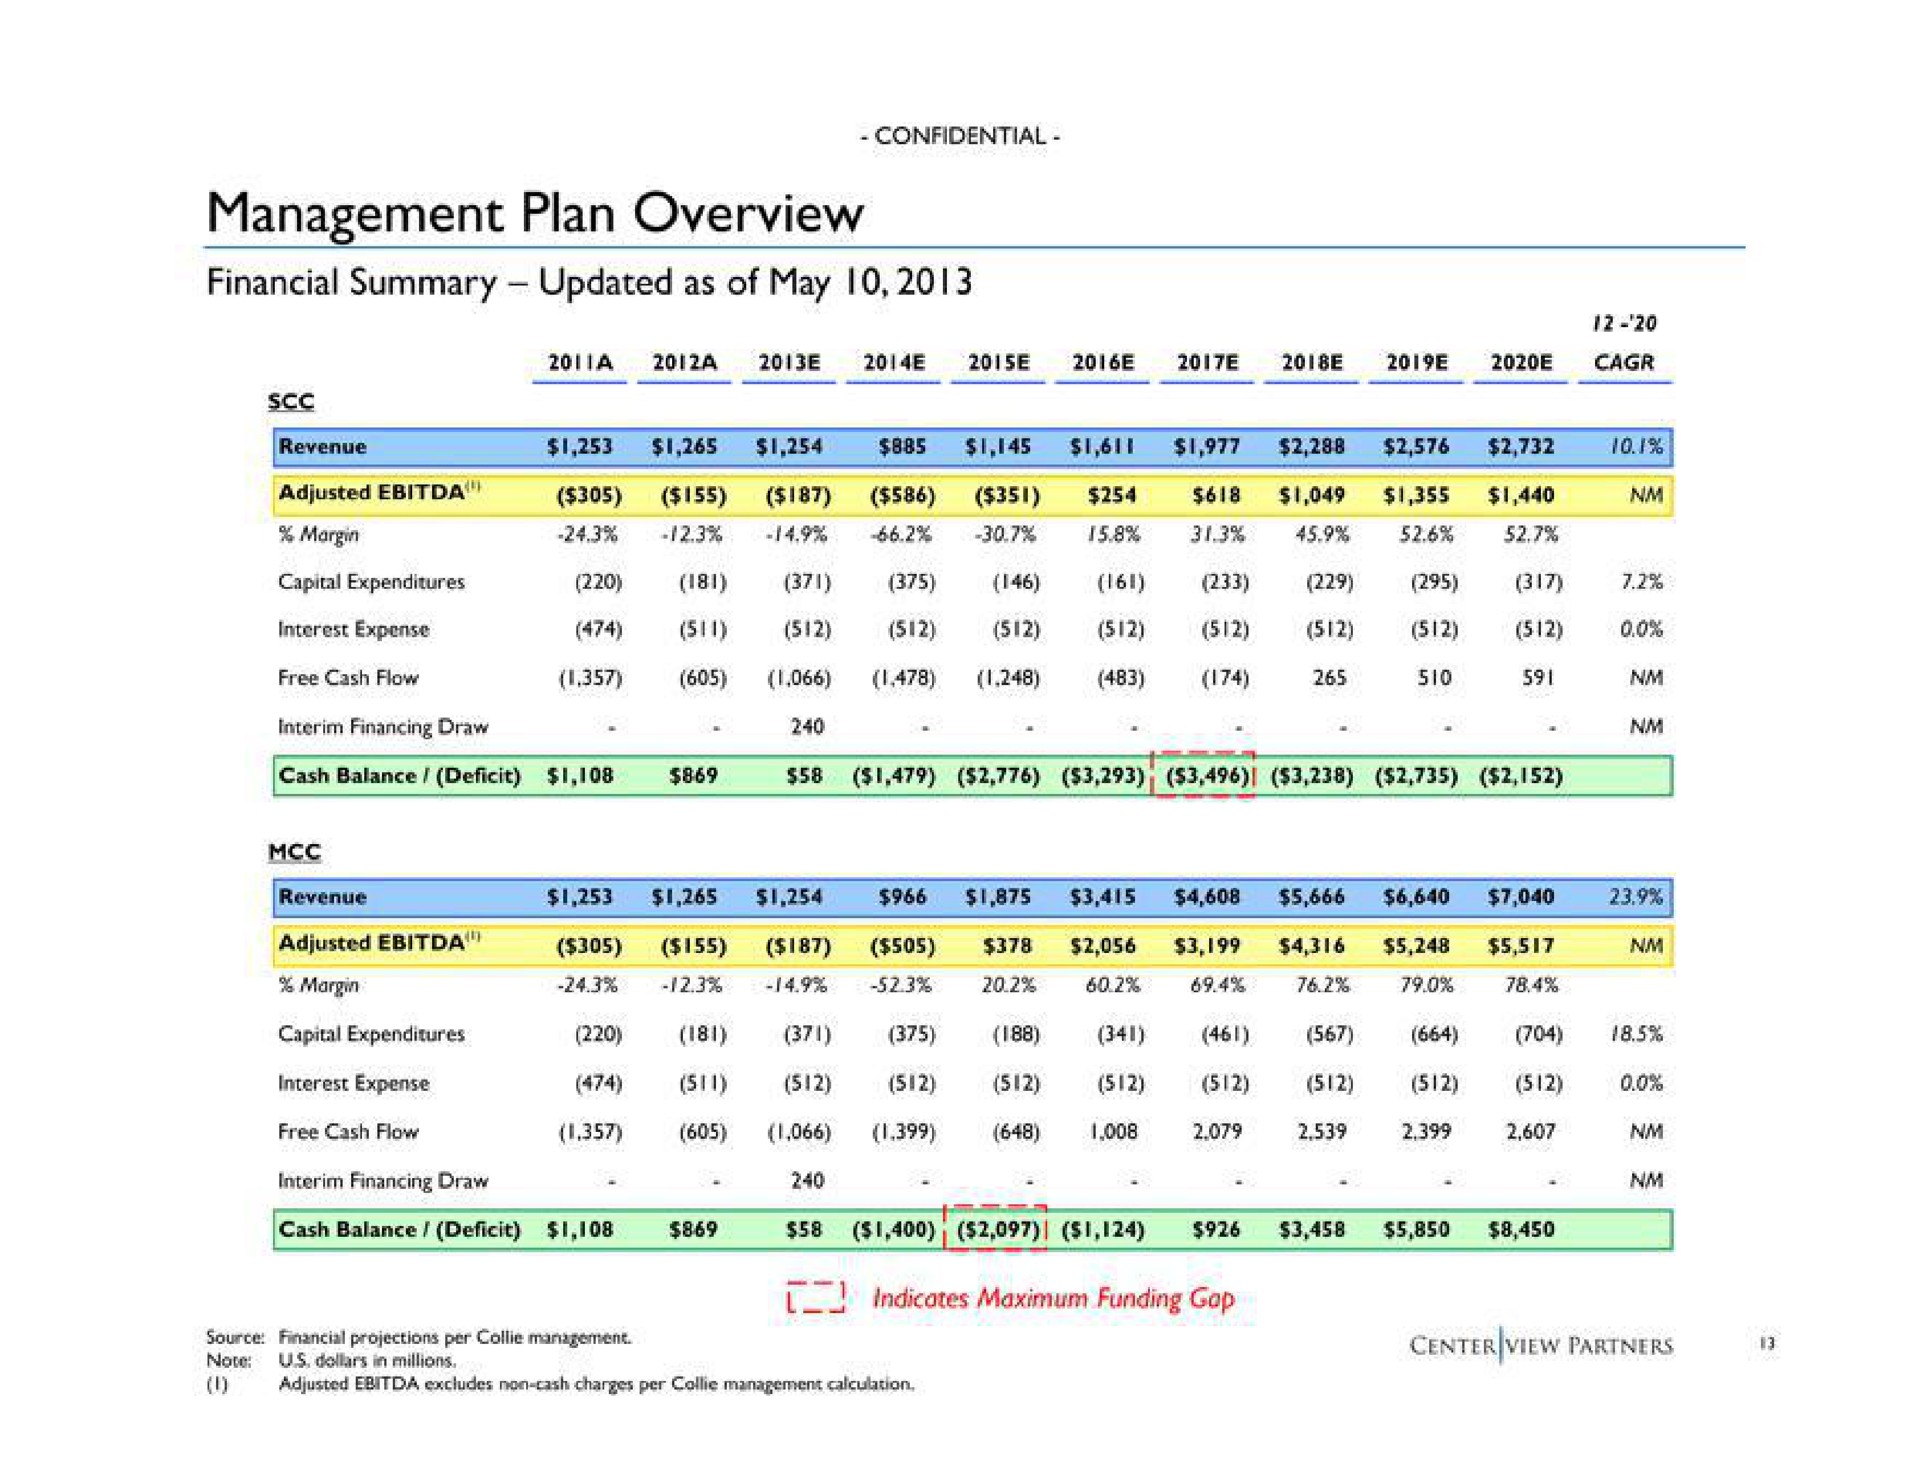 management plan overview financial summary updated as of may | Centerview Partners